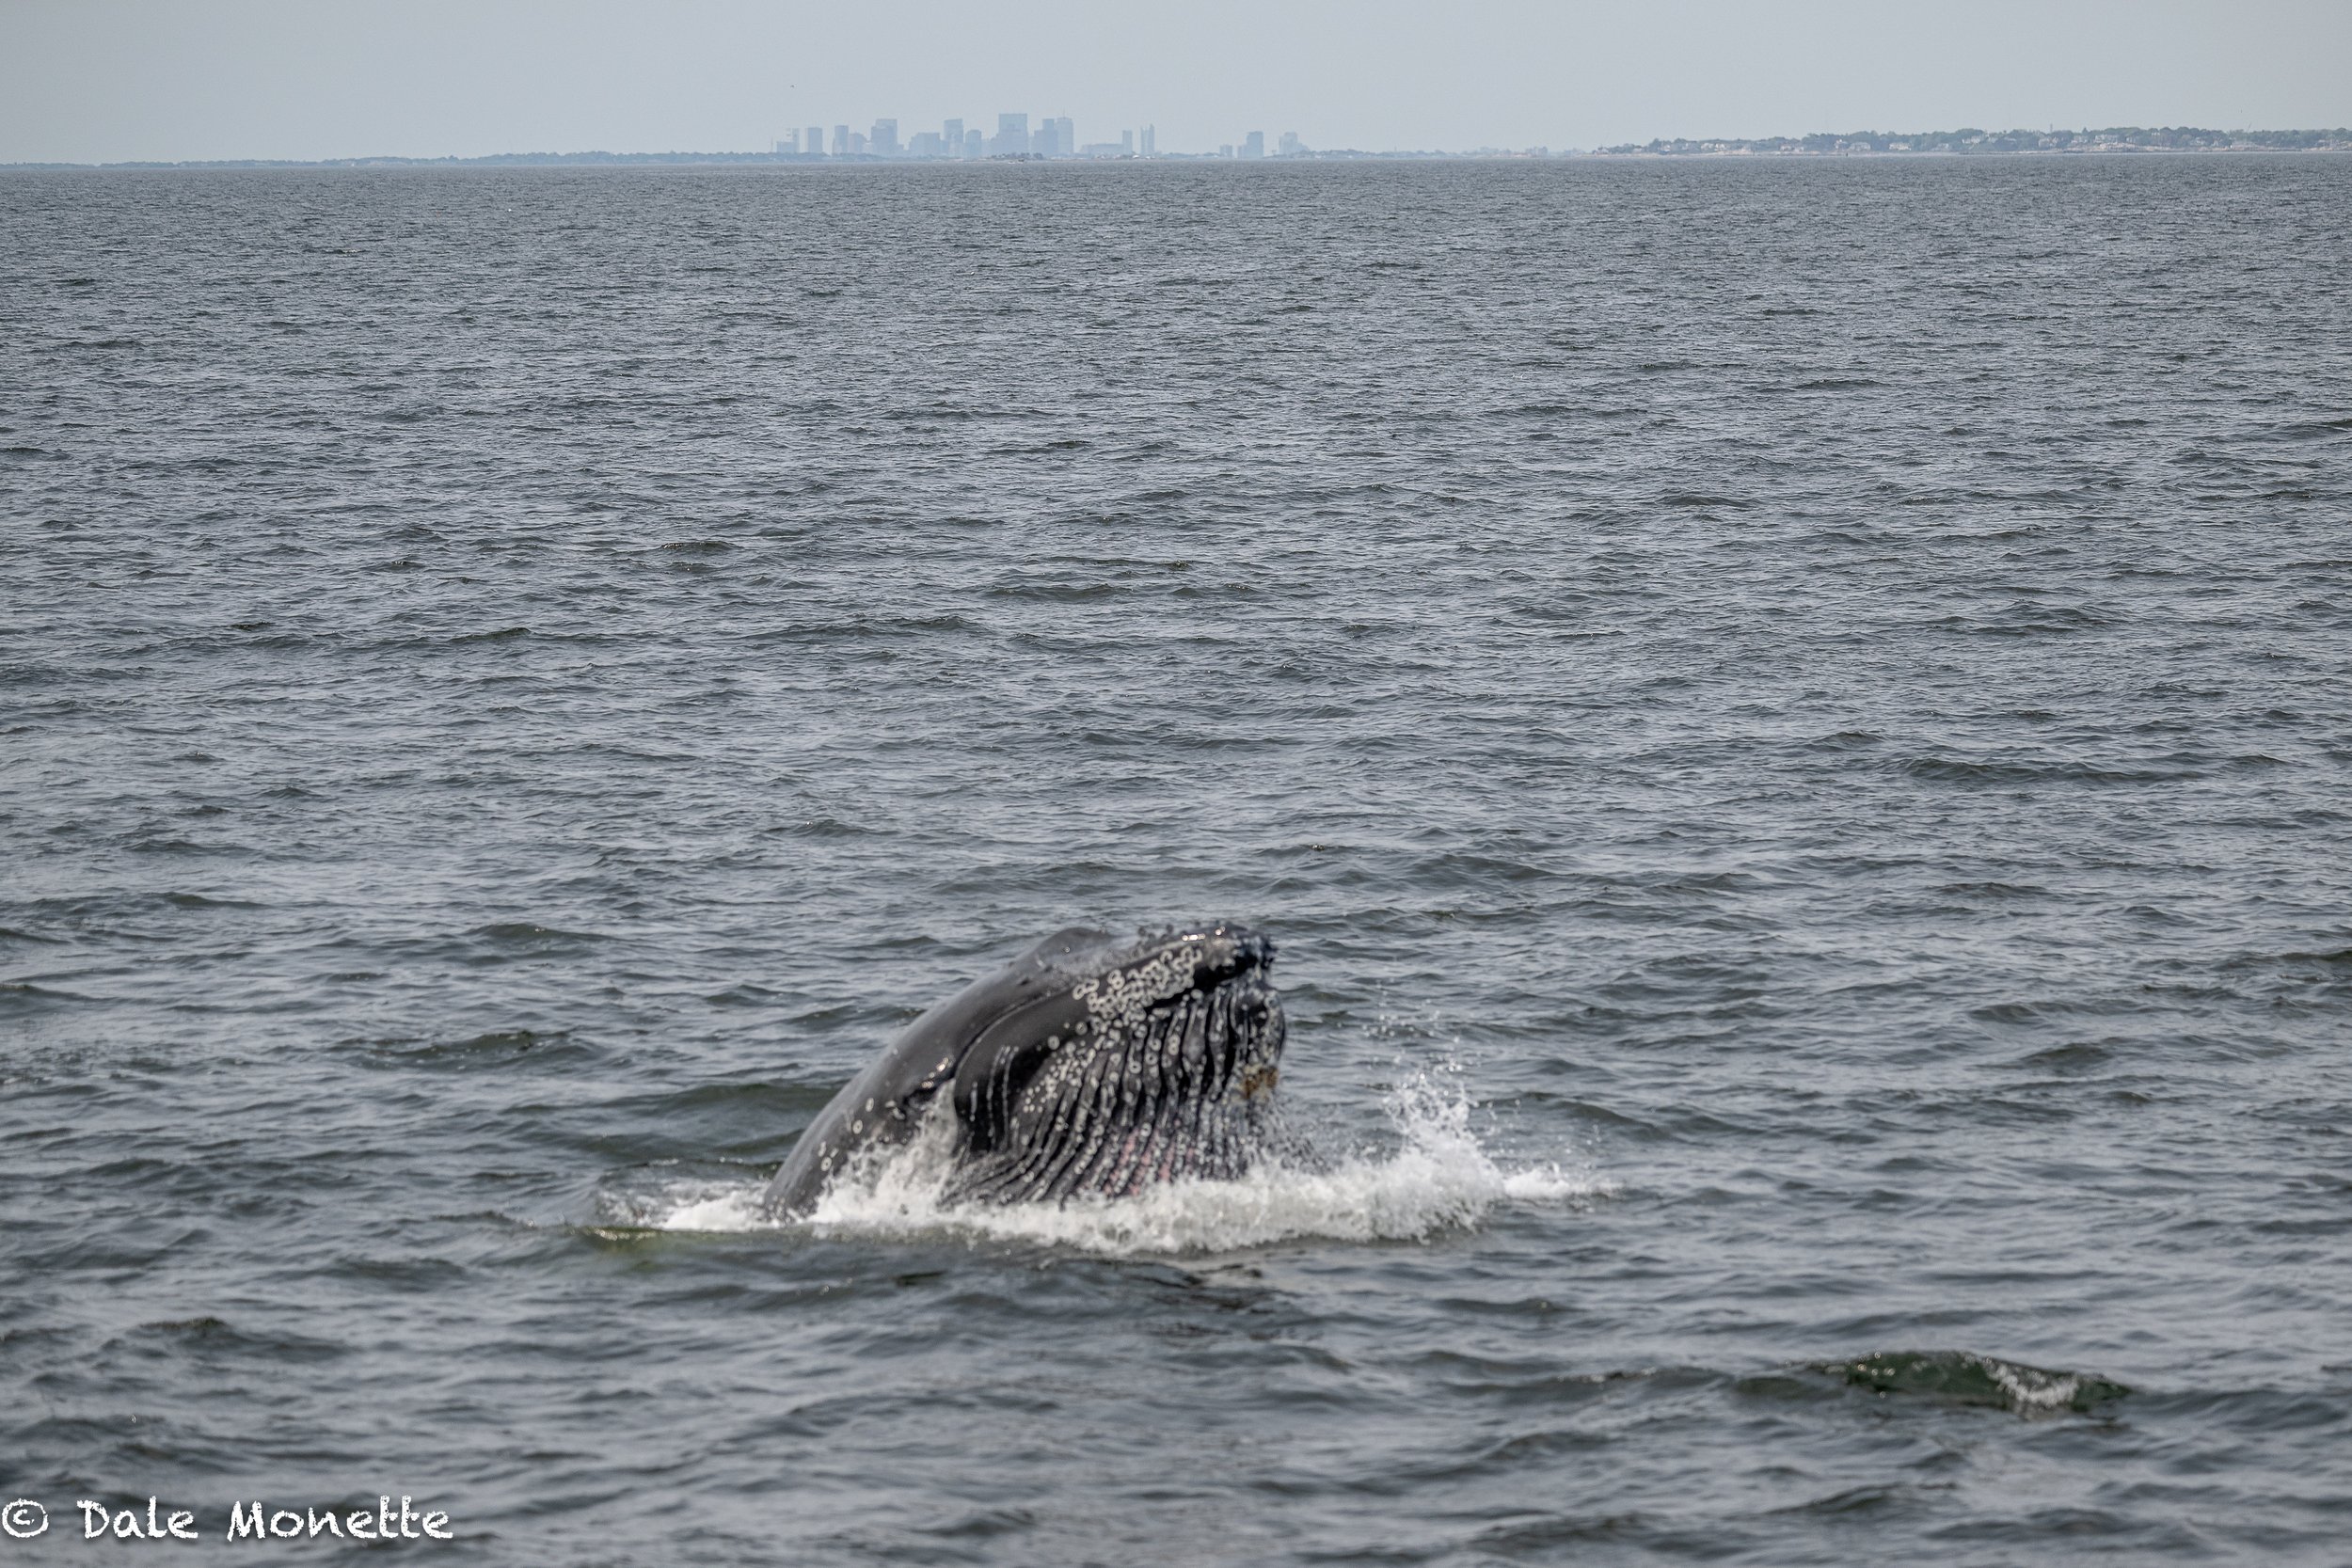   A male humpback whale lunge feeding 25 miles north of Boston out on the Stellwagen Bank National Marine Sanctuary.  